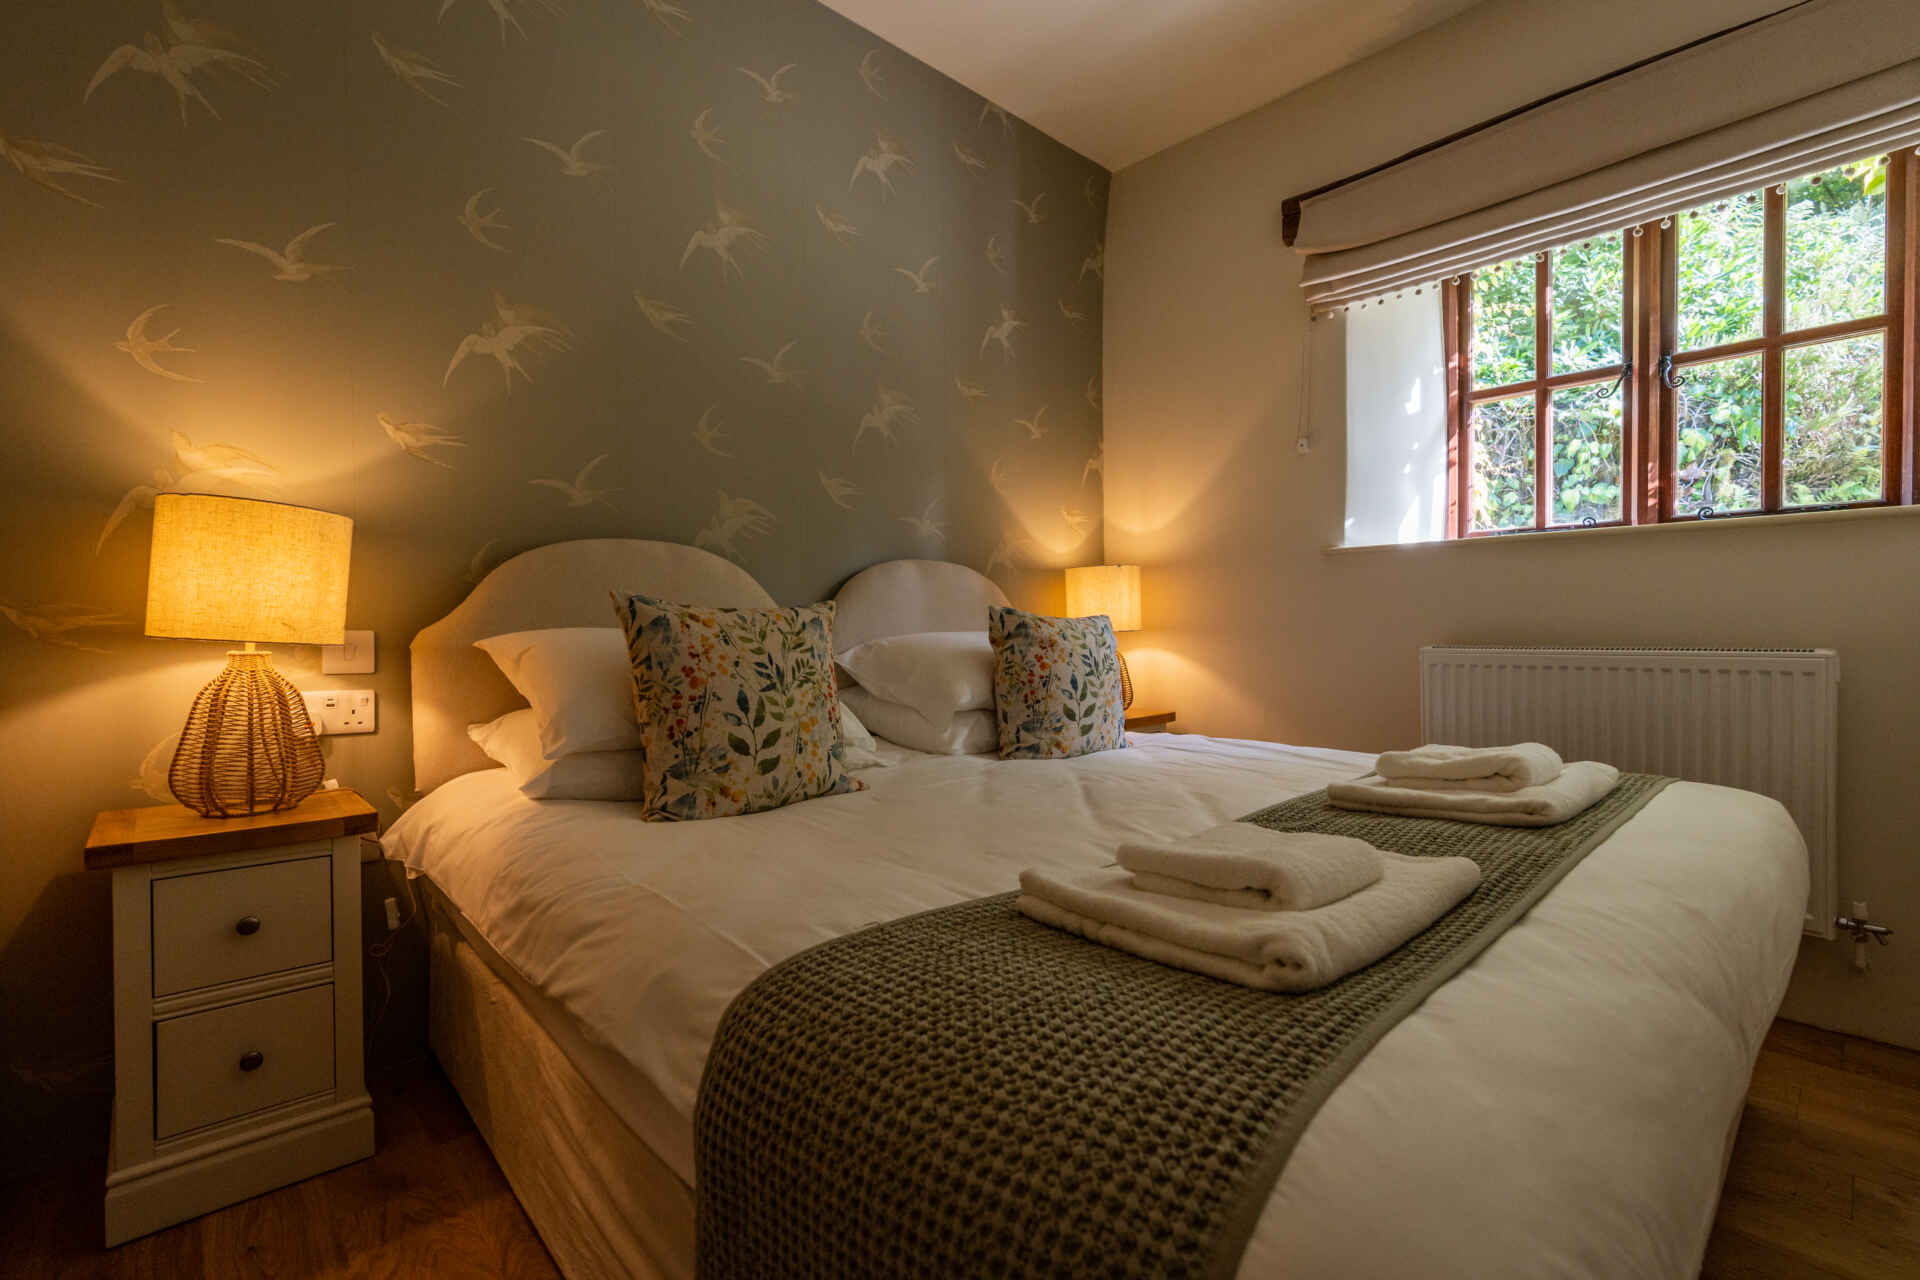 Bedroom at Birch Cleave Barns - Somerset Dog Friendly Cottages